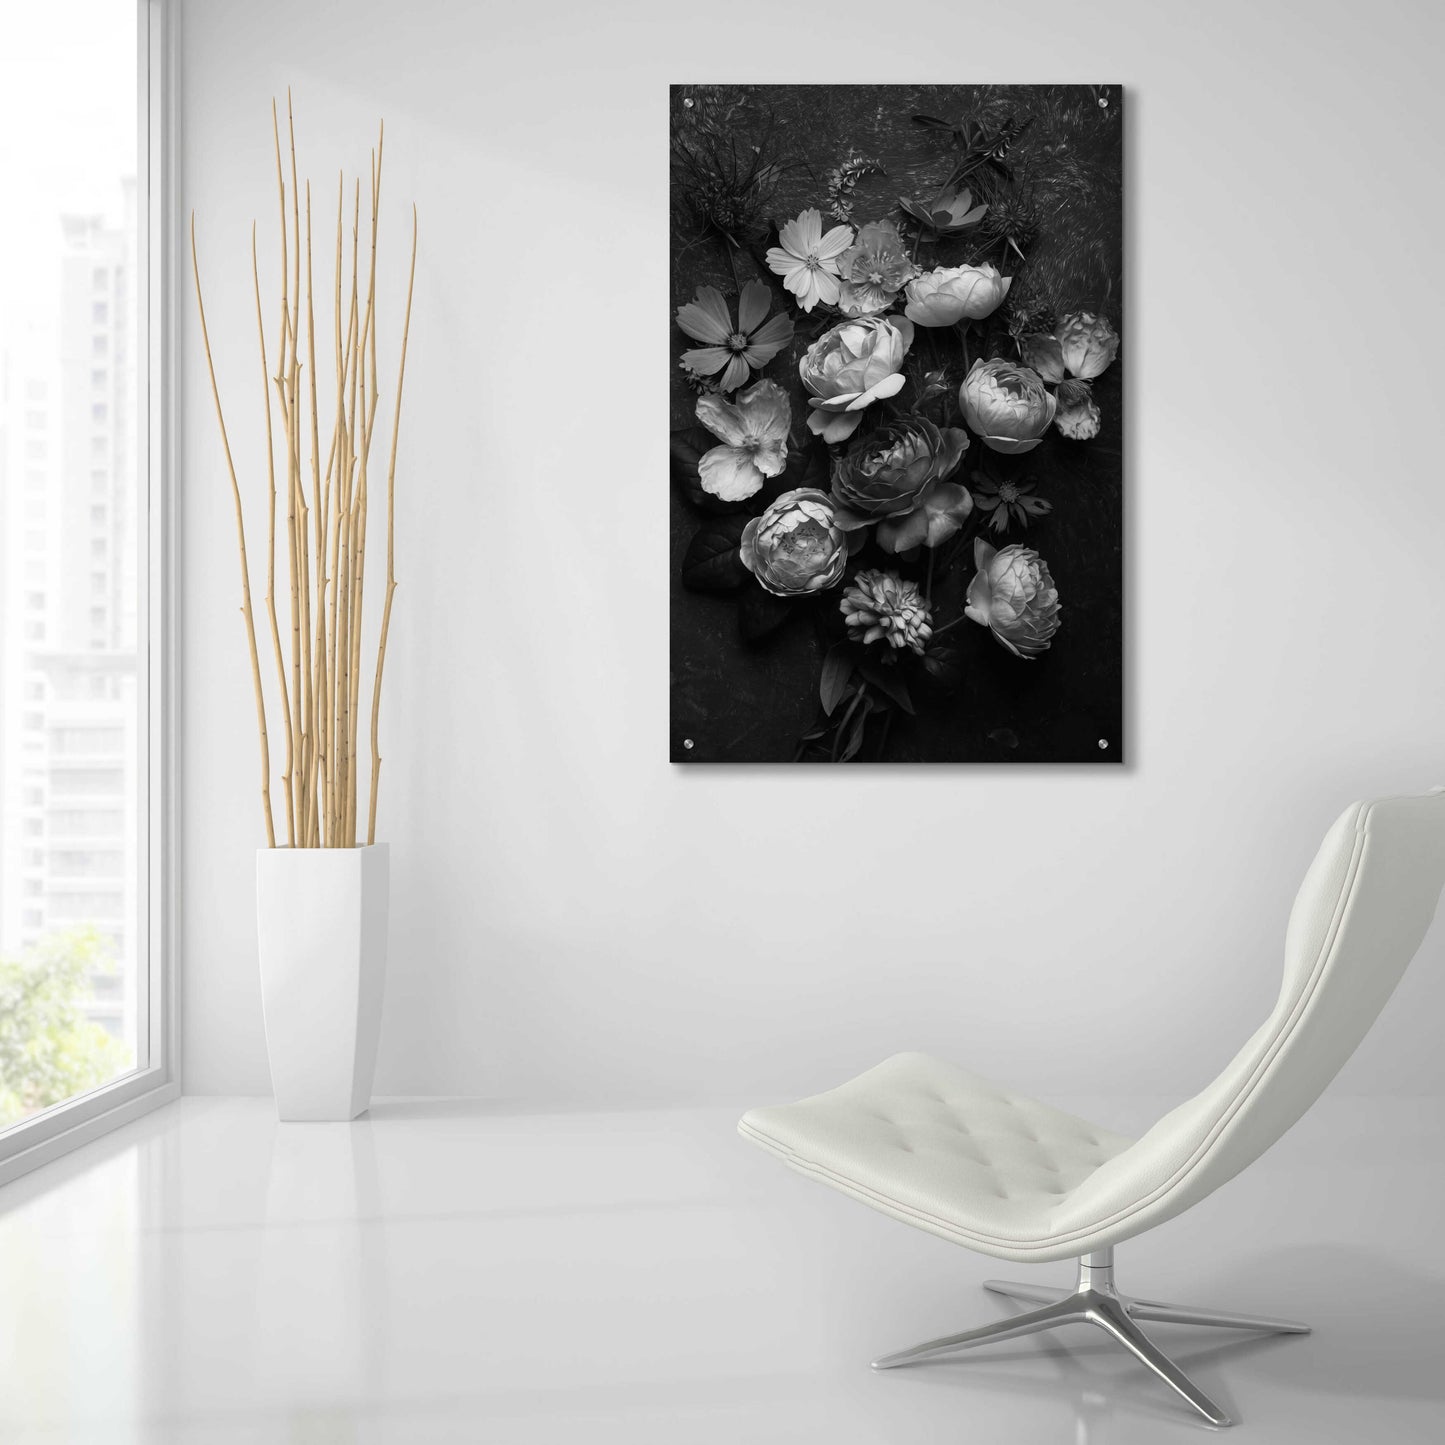 Epic Art 'A Monochrome Pocket Full of Posies' by Leah McLean, Acrylic Glass Wall Art,24x36